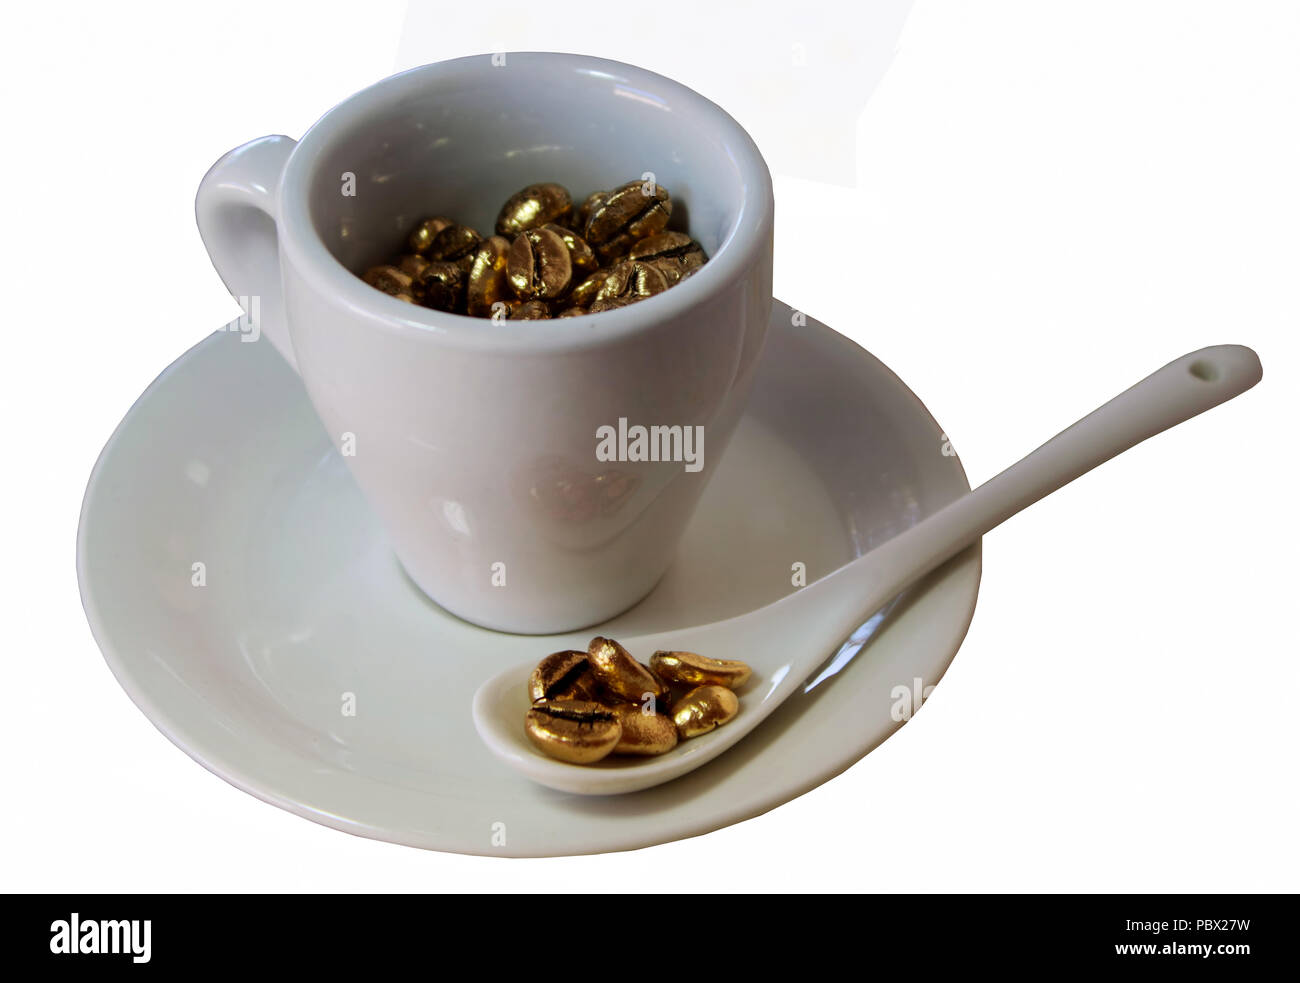 golden coffe bean whithe cup isolated bar Stock Photo